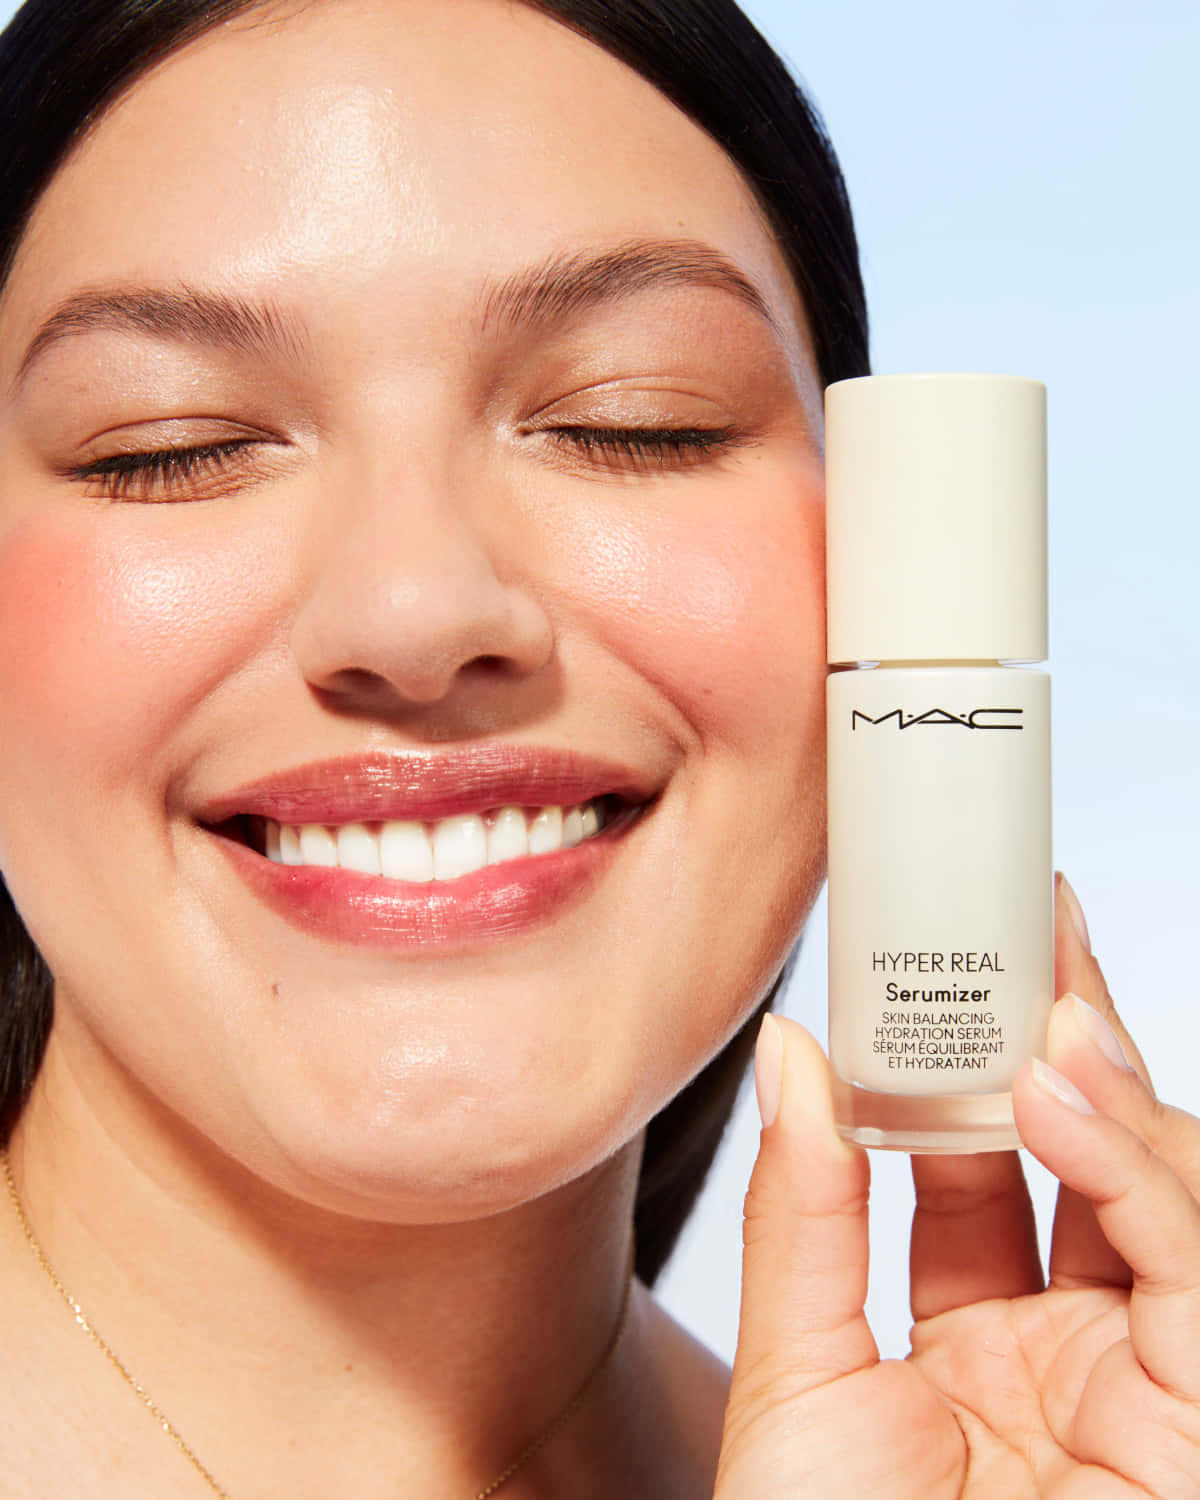 Take the day with confidence with Mac Cosmetics